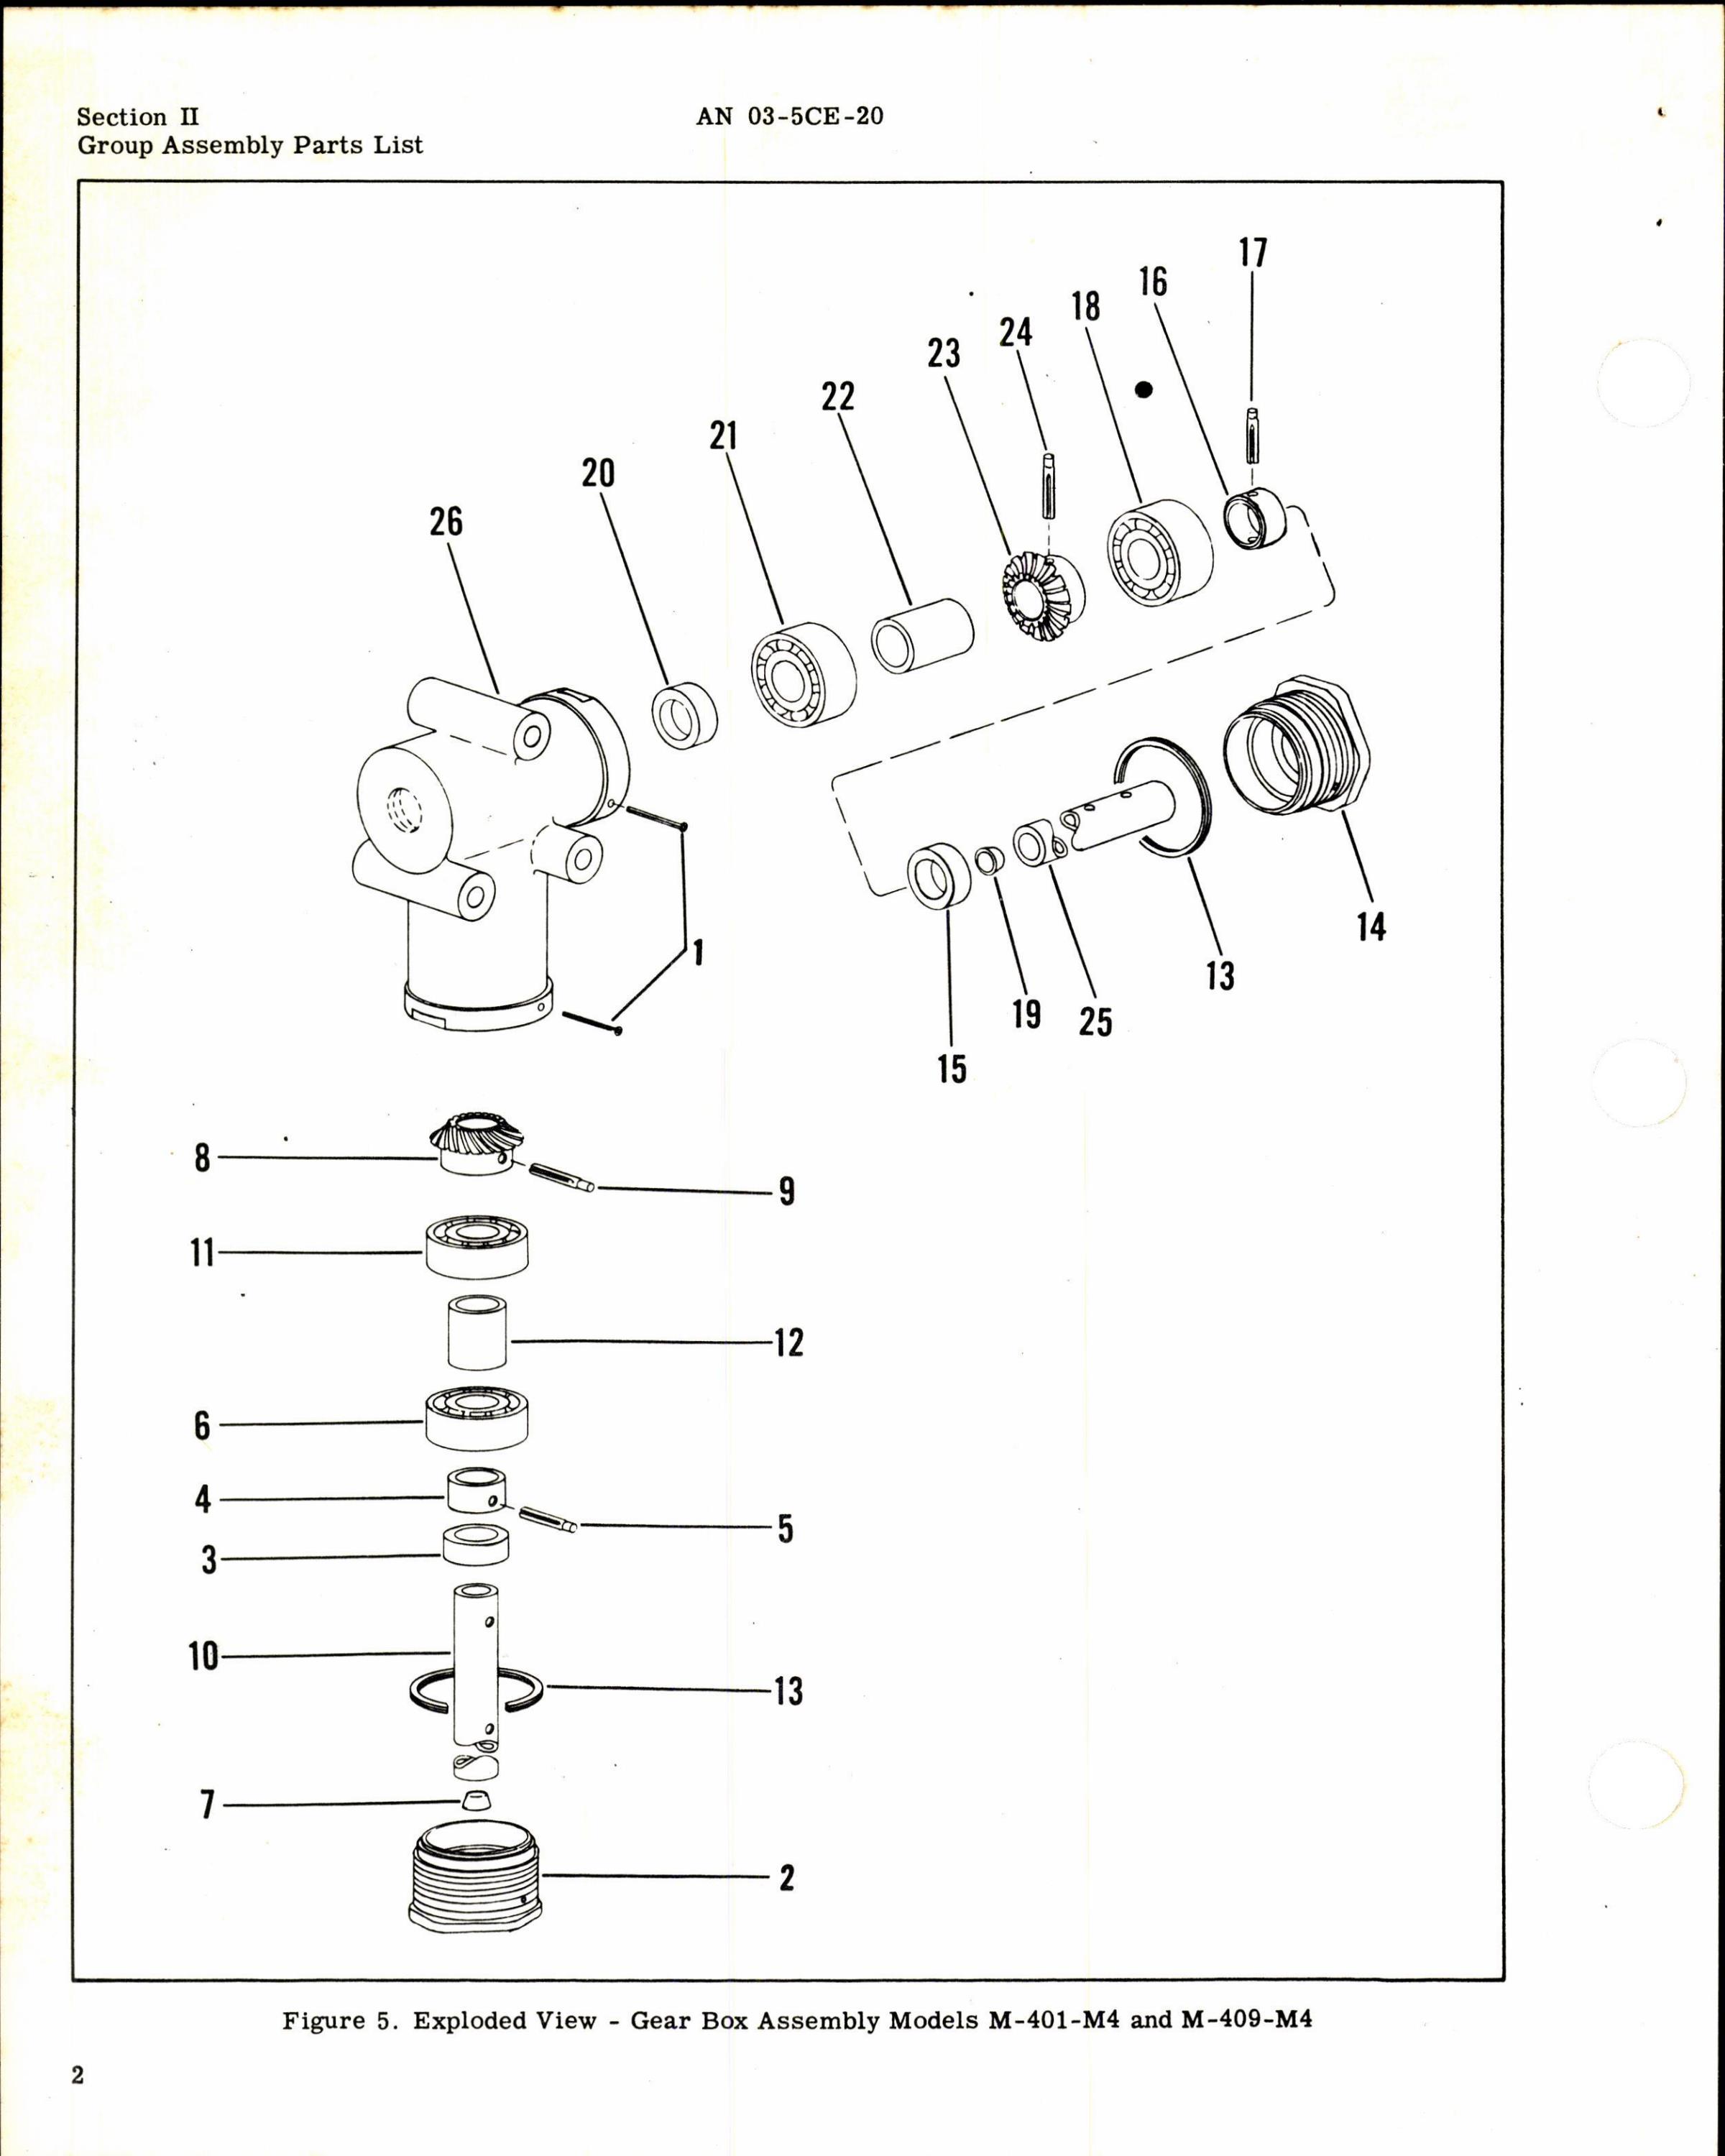 Sample page 6 from AirCorps Library document: Parts Catalog for Air Associates Gear Box and Drive Assemblies